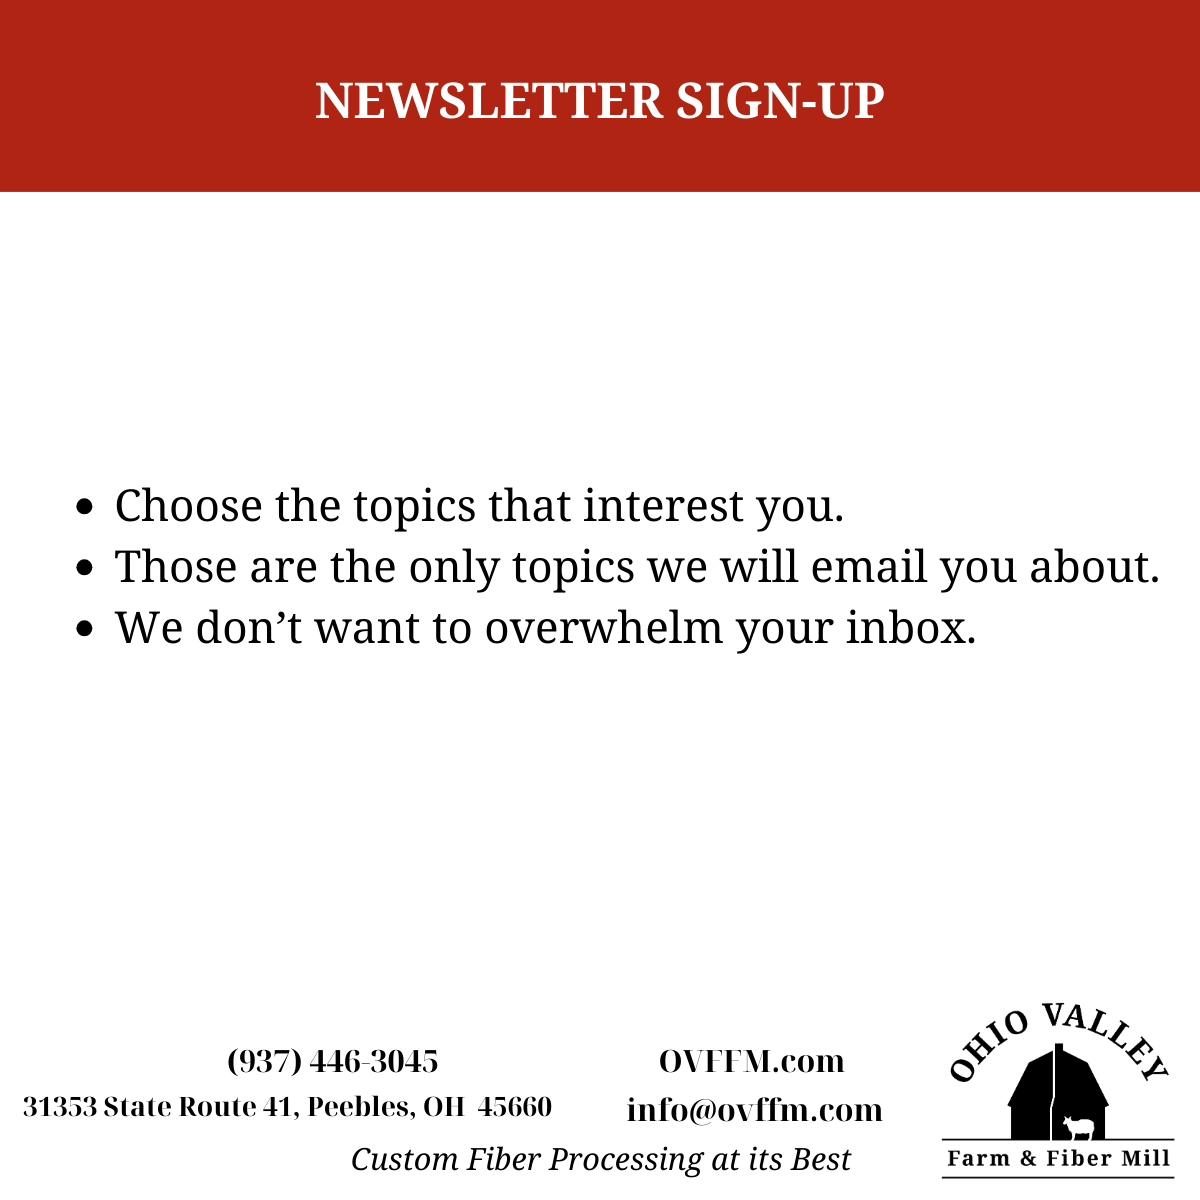 Sign-up for Ohio Valley Farm and Fiber Mill's newsletter to keep our community, customers and subscribers updated on our services, products, events and workshops.